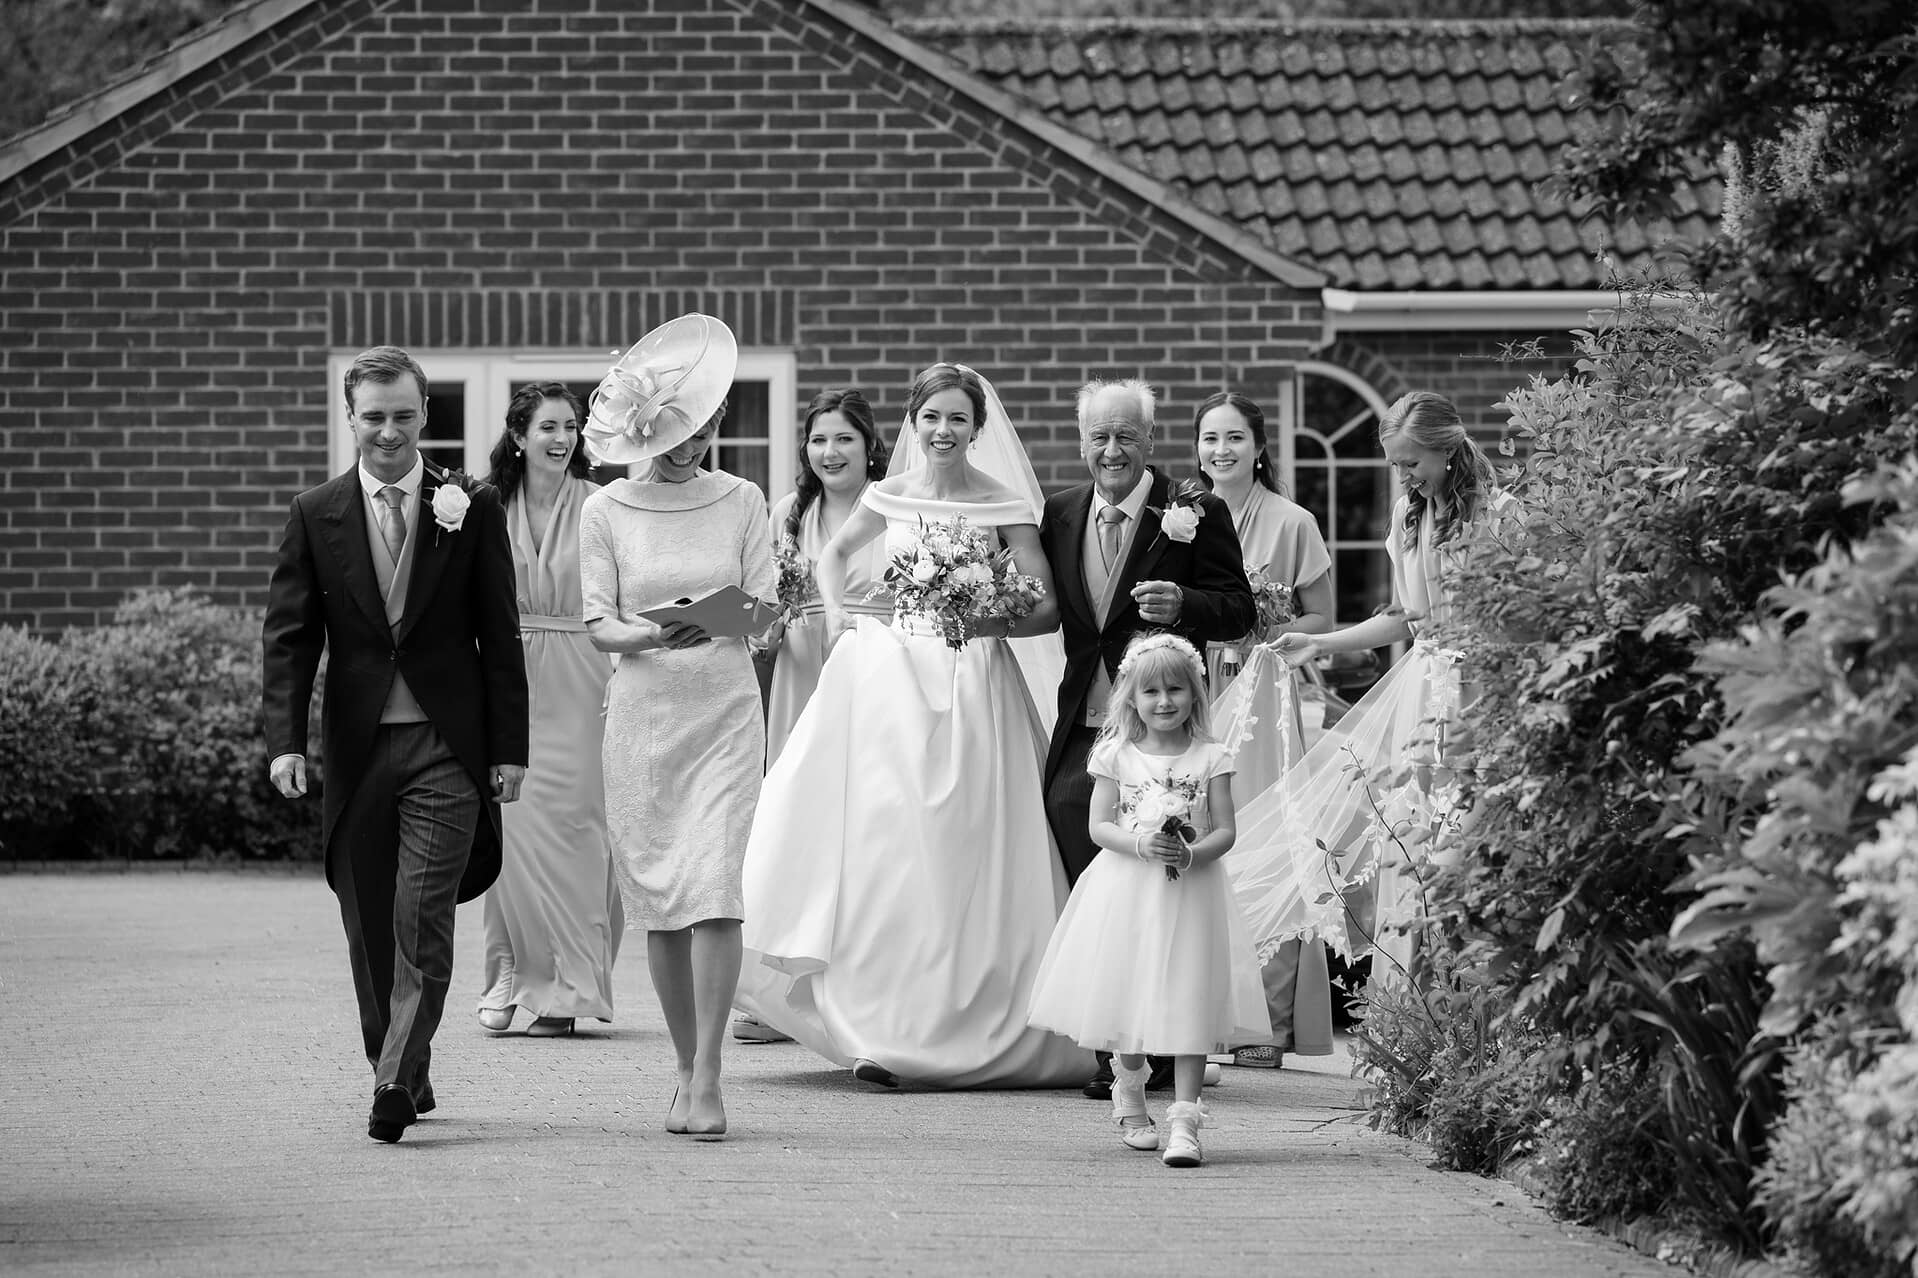 The bride, her parents, brother, and bridesmaids leaving the house to walk to church